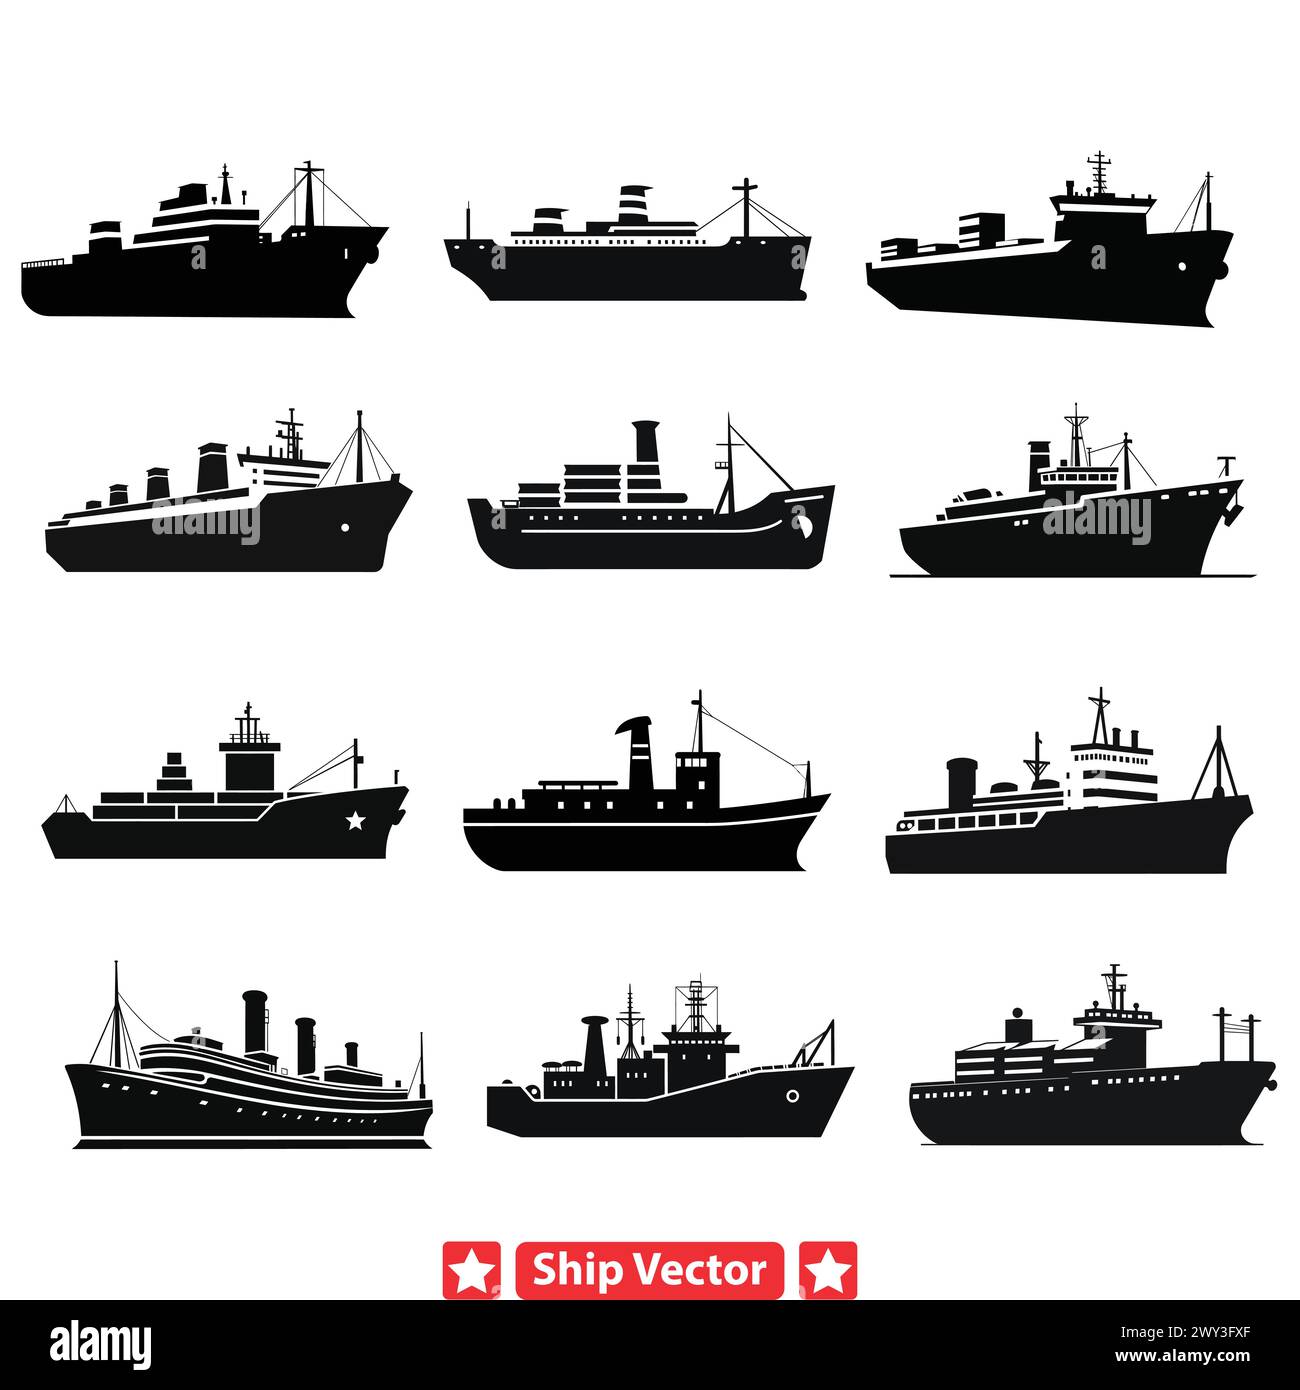 Seafarer s Legacy  Classic Ship Silhouettes Celebrating the Timeless Romance of the Sea Stock Vector